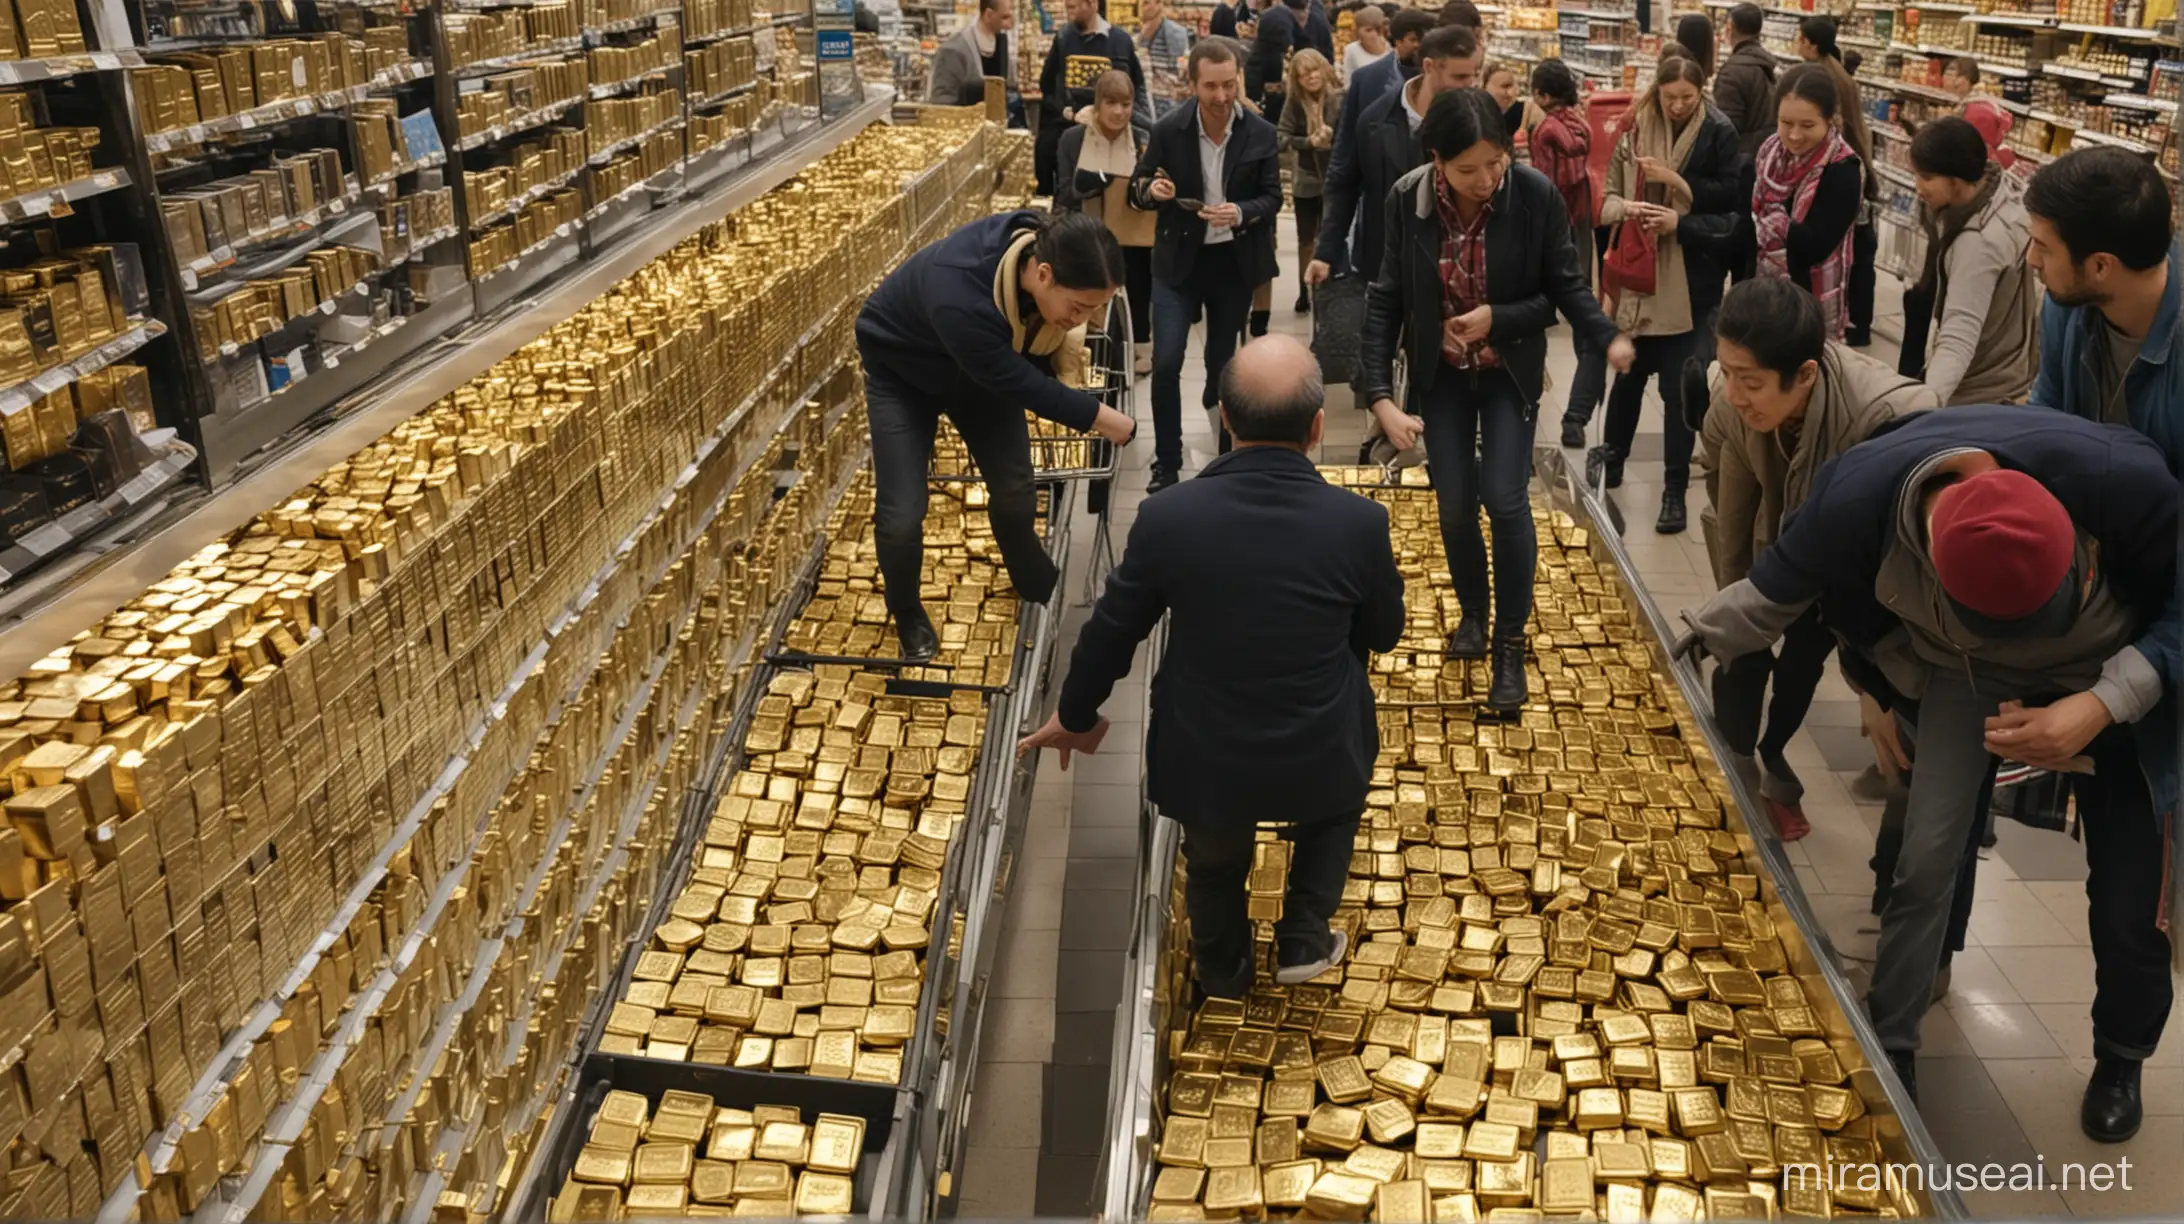 people pushing each other out of the way to buy gold bars and coins in a supermarket